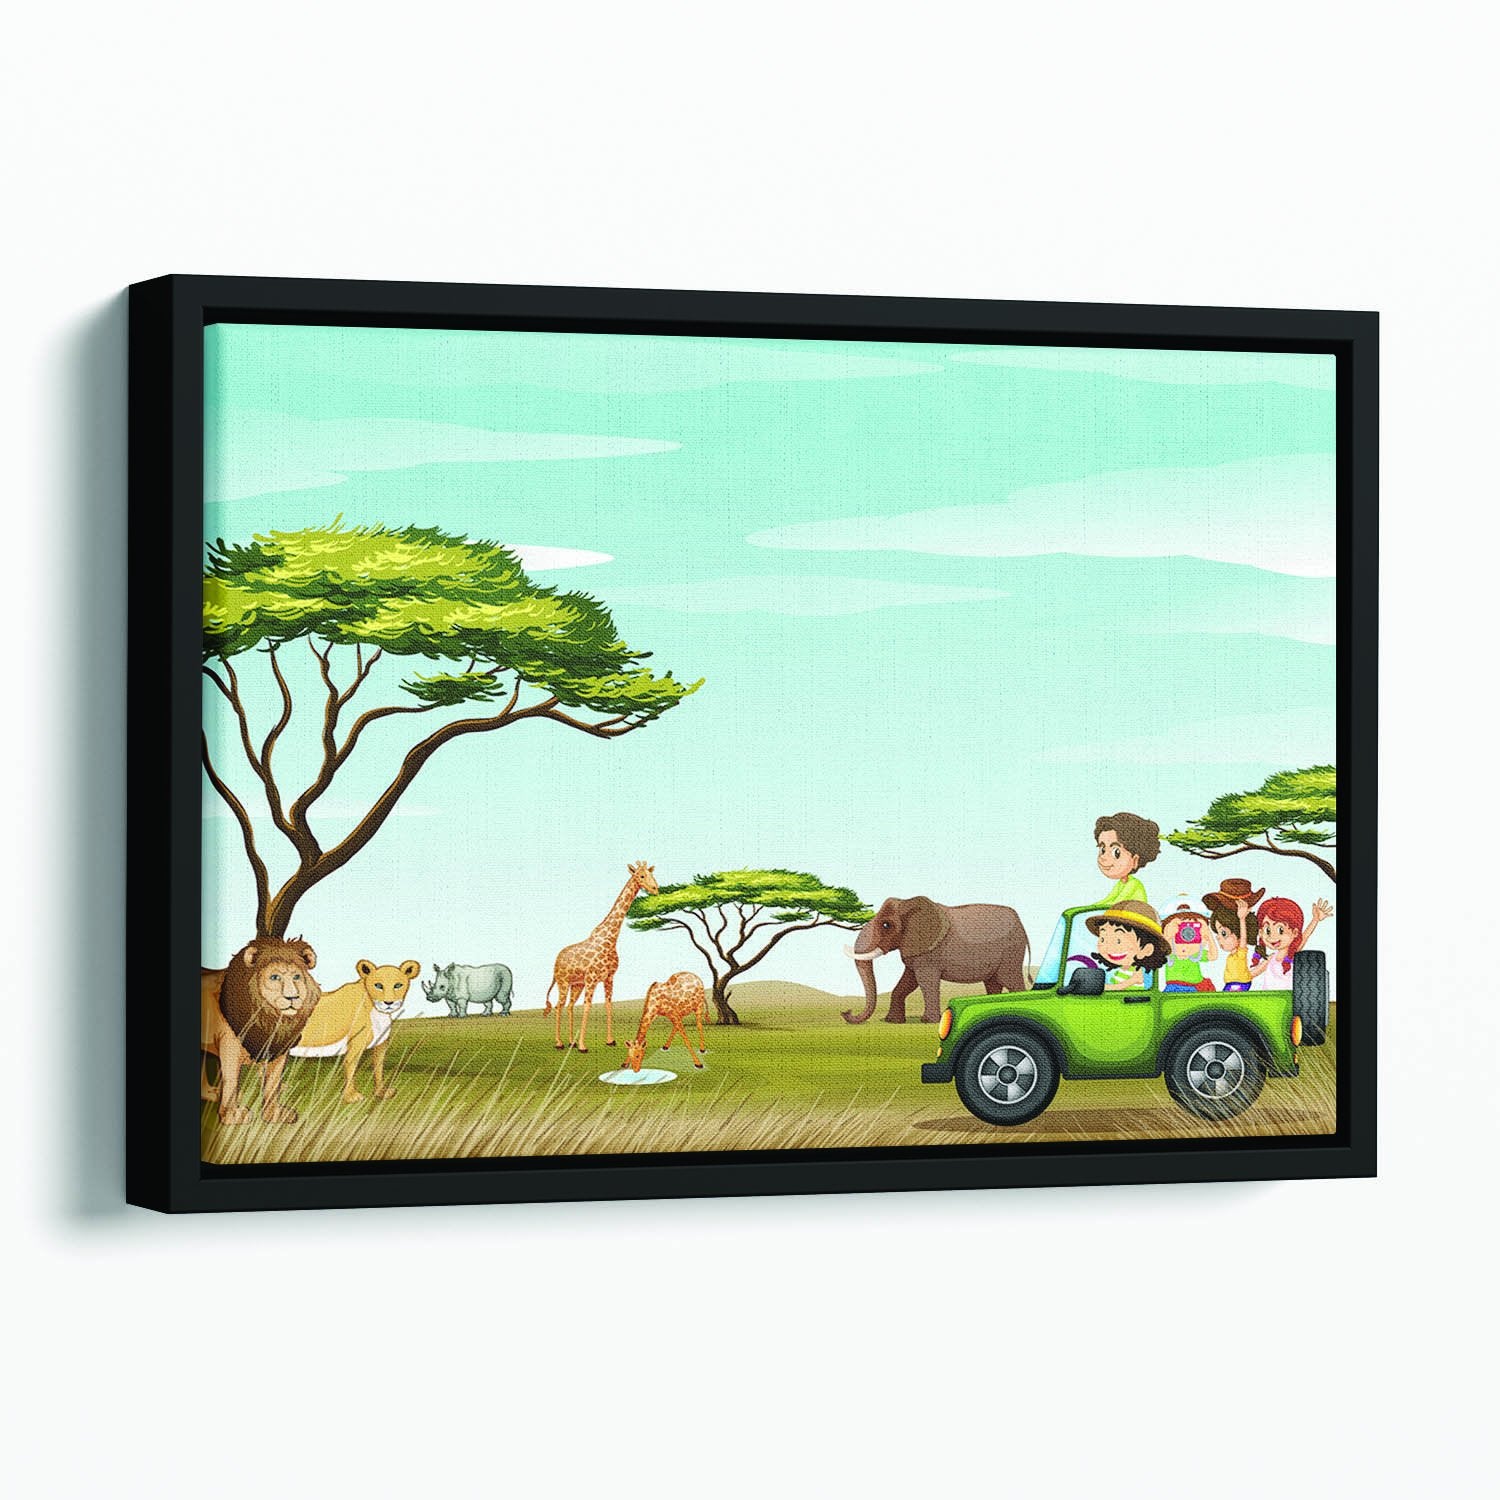 Roadtrip in the field full of animals Floating Framed Canvas